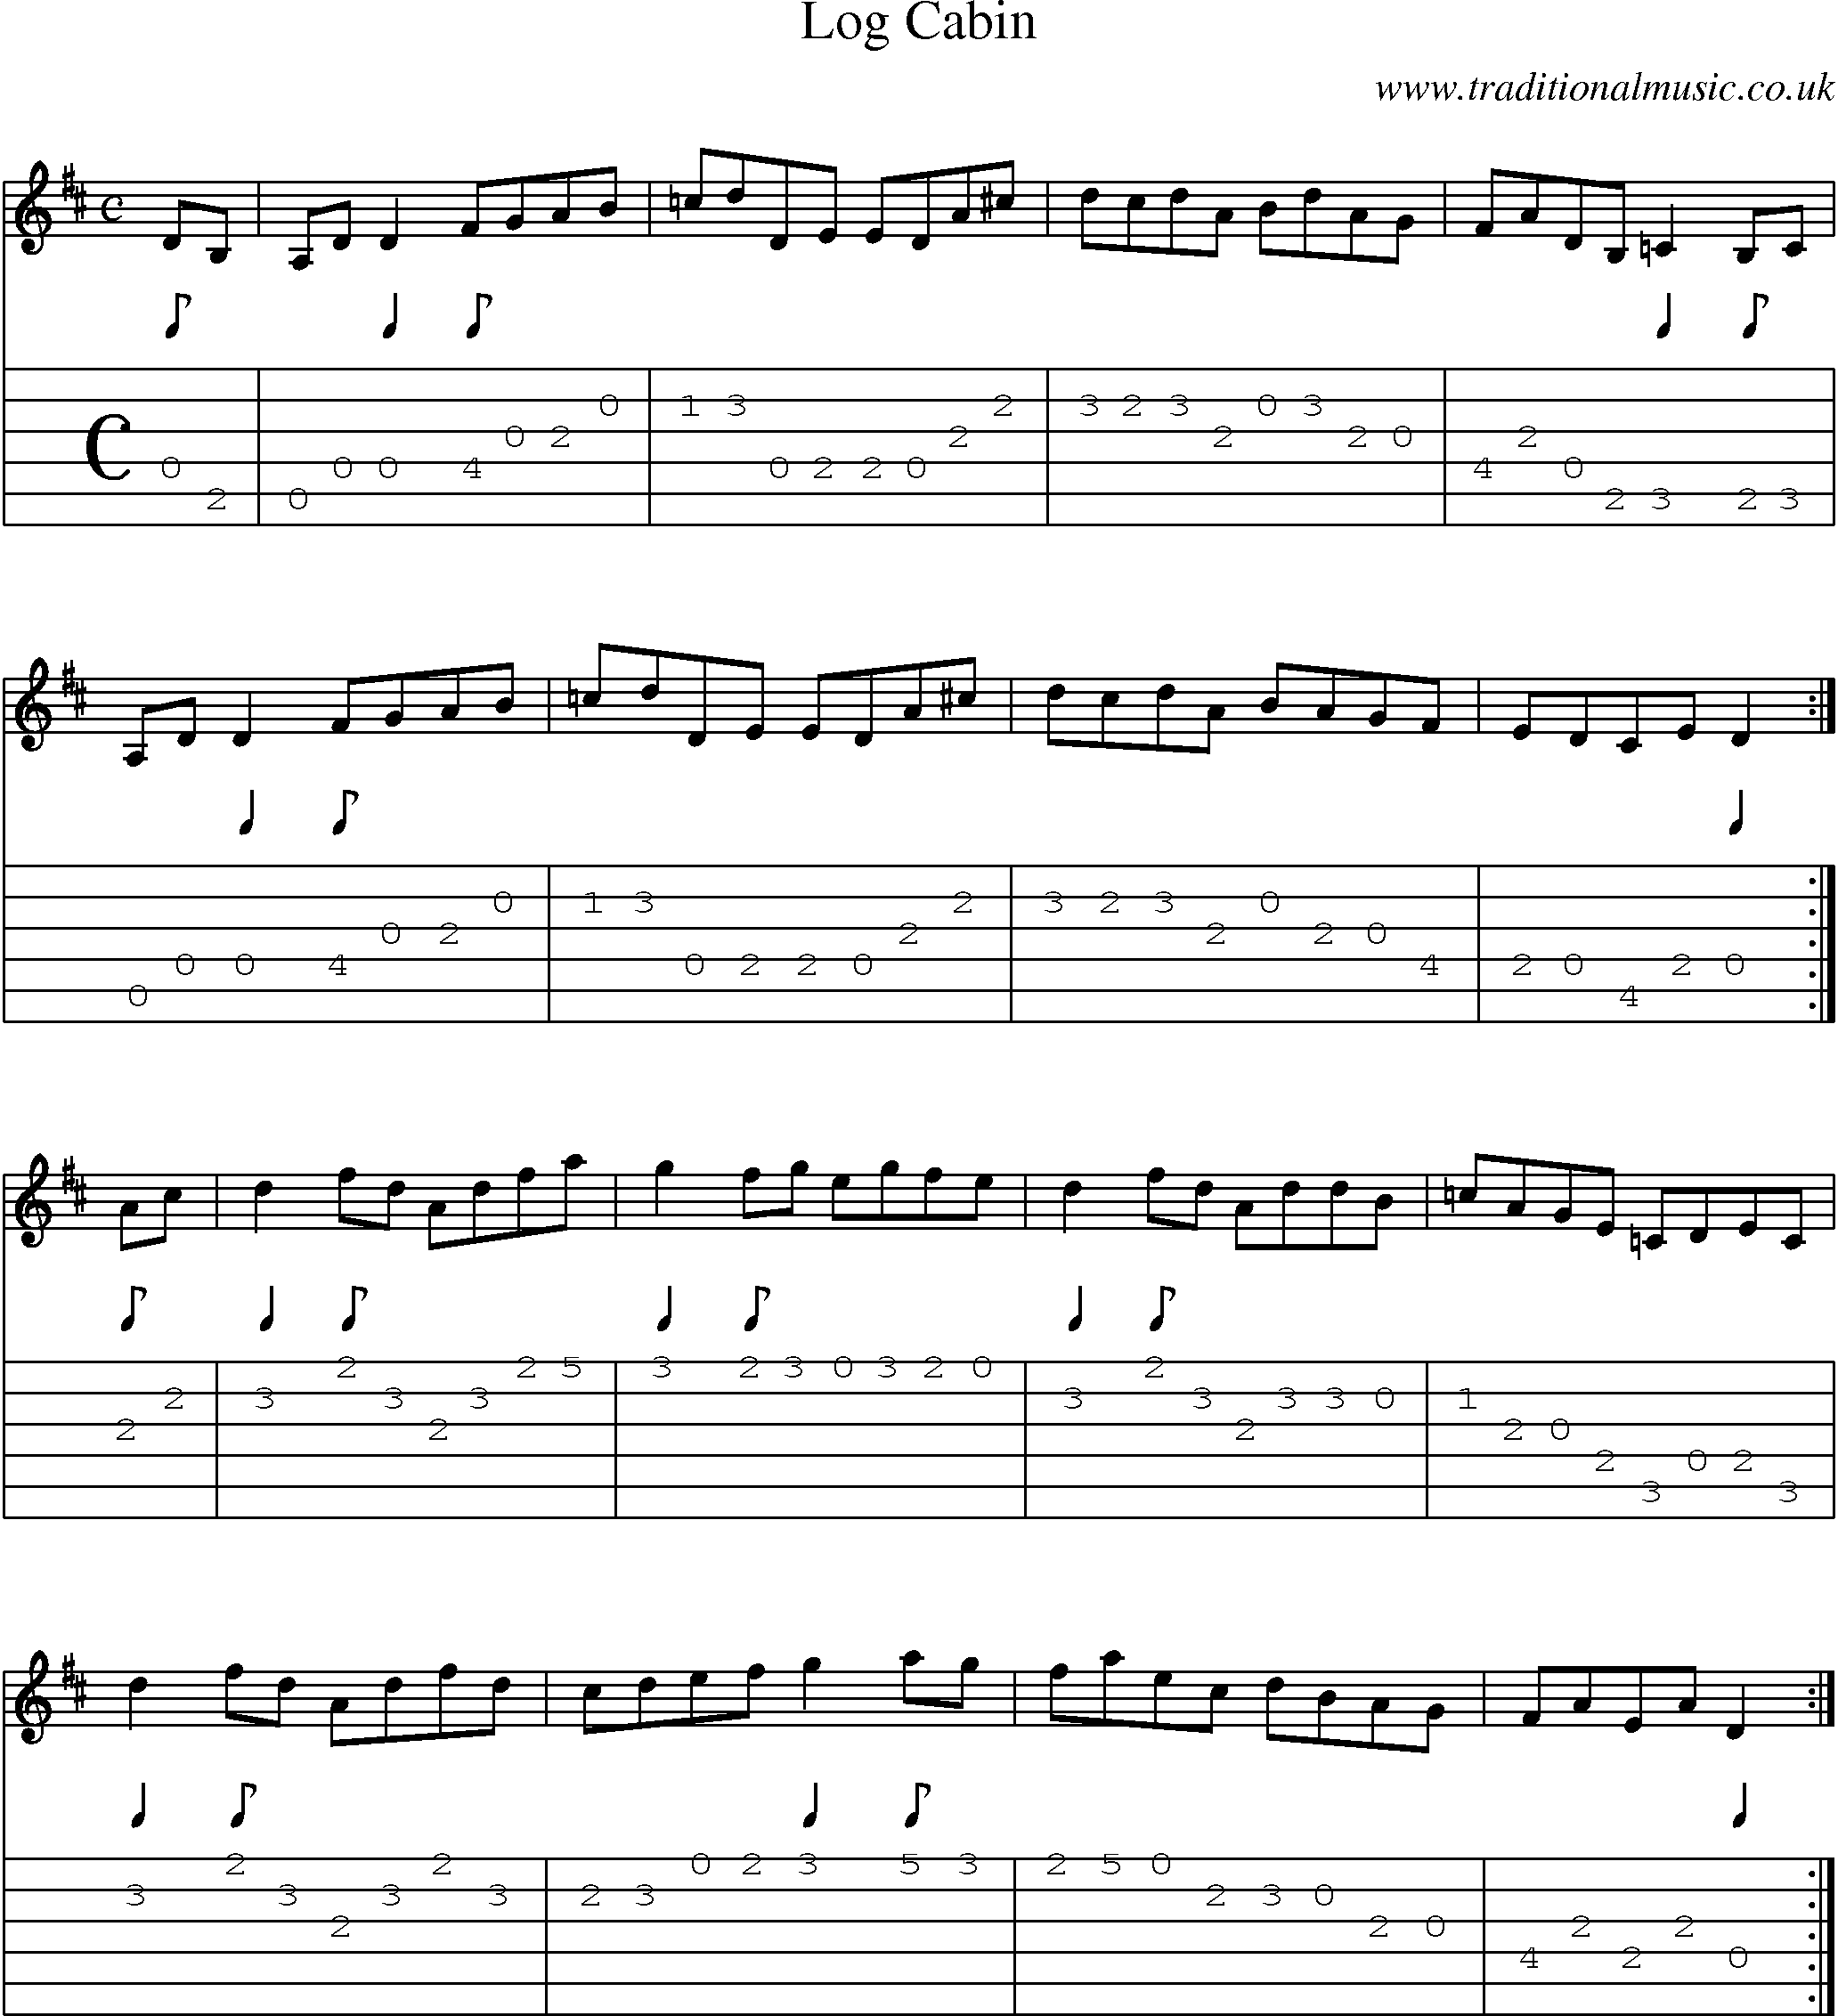 Music Score and Guitar Tabs for Log Cabin